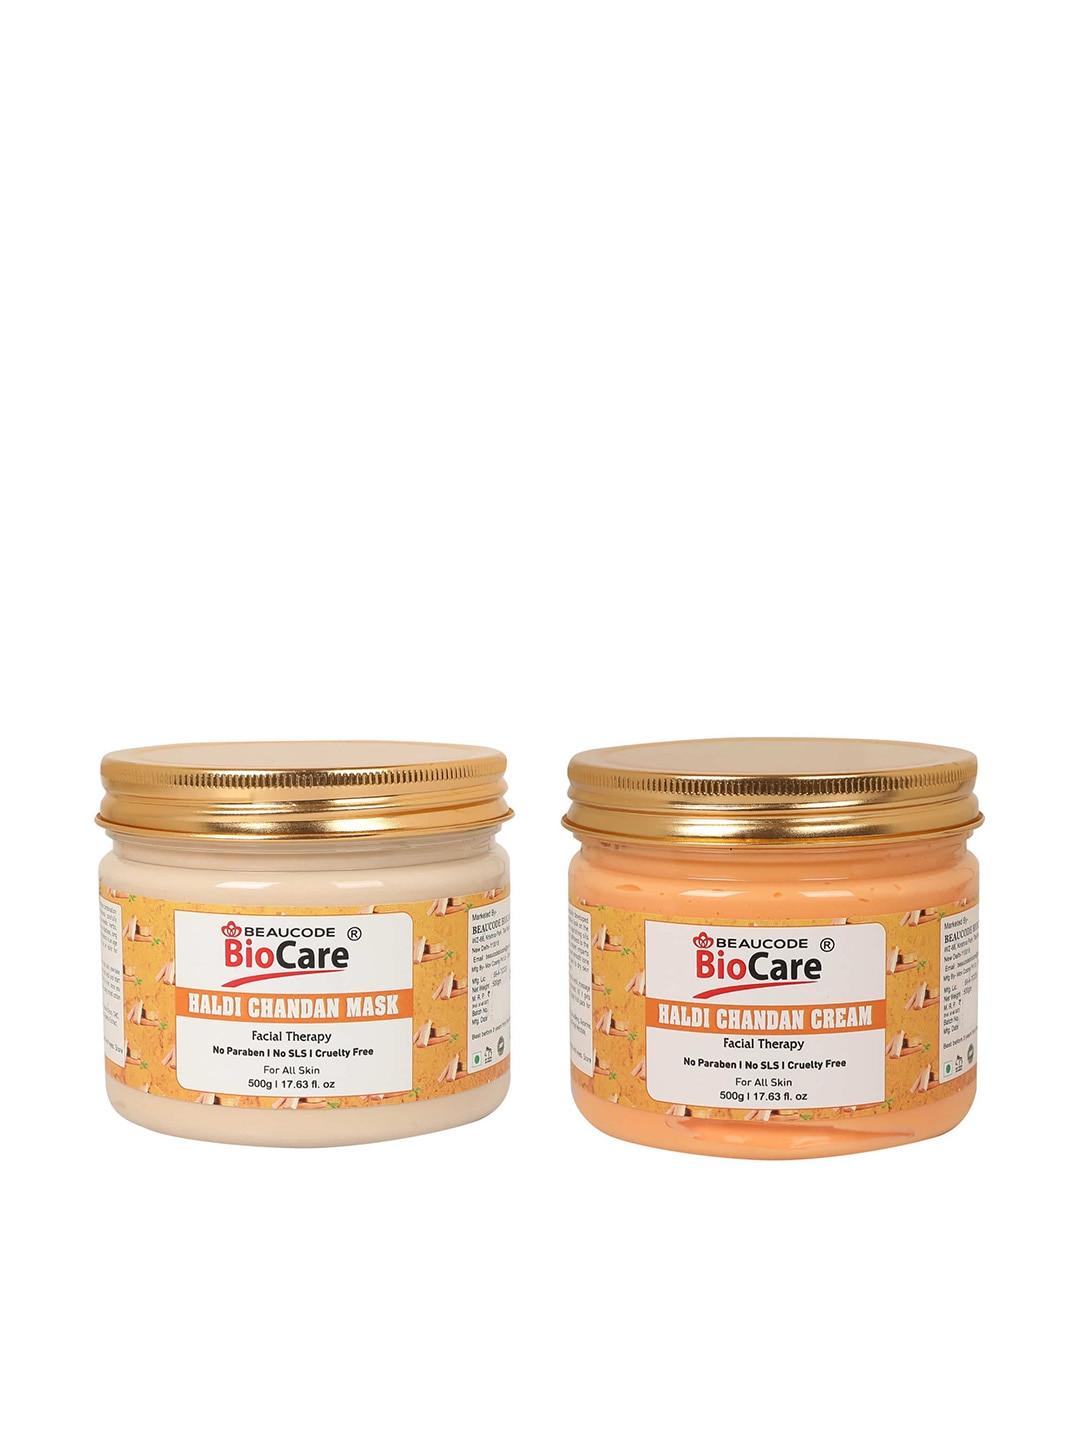 beaucode biocare set of 2 haldi chandan face and body cream and mask 1kg